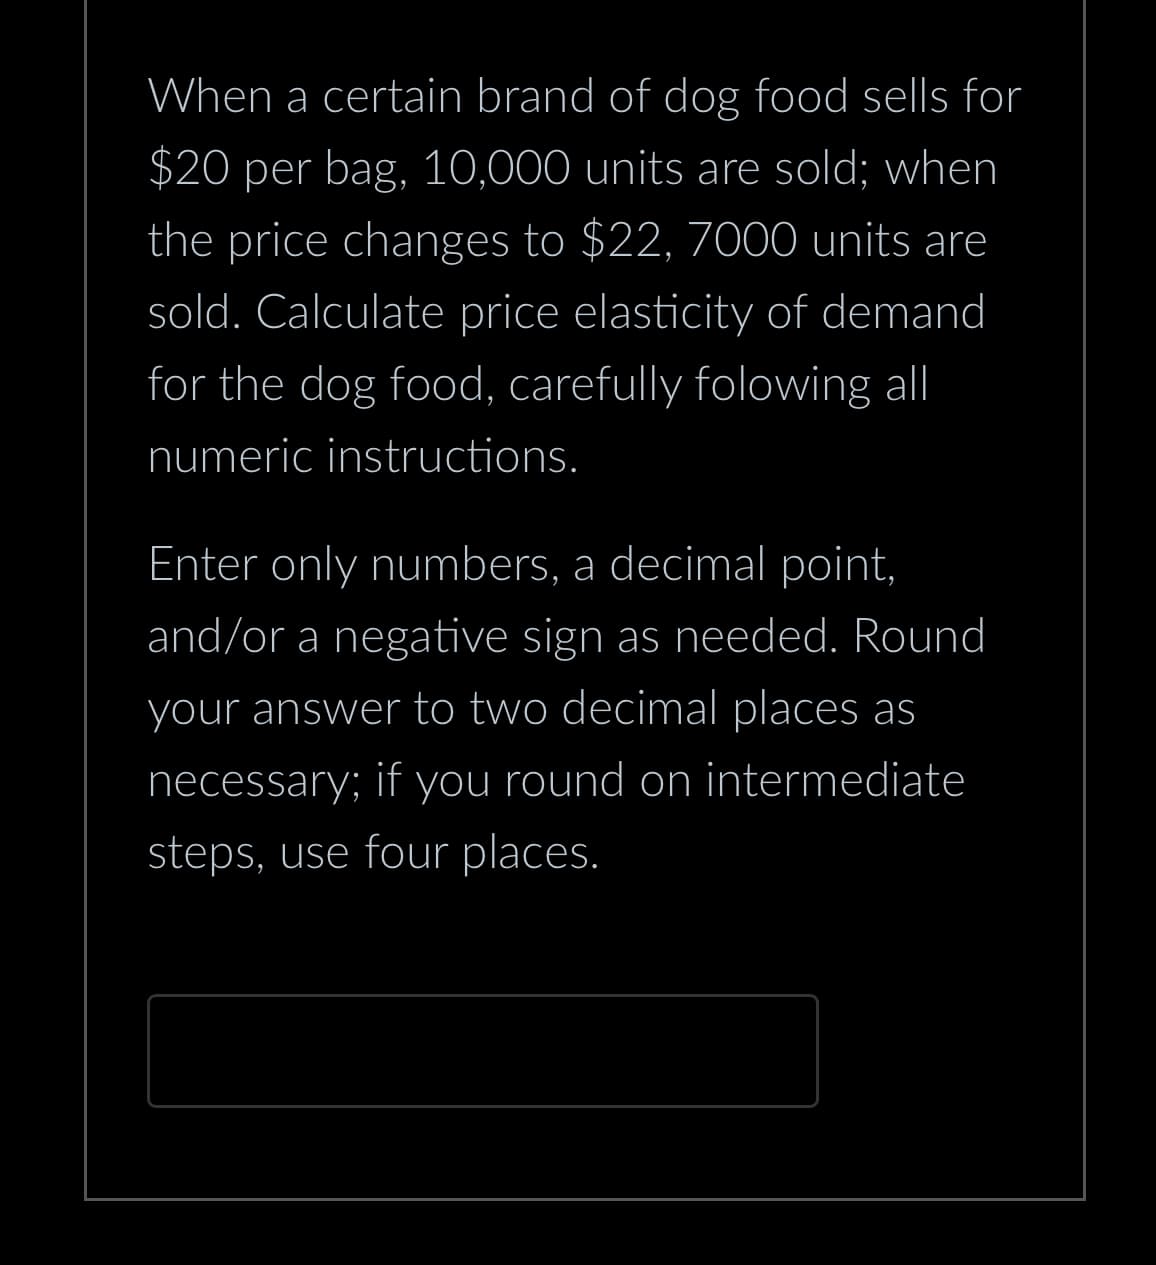 When a certain brand of dog food sells for
$20 per bag, 10,000 units are sold; when
the price changes to $22, 7000 units are
sold. Calculate price elasticity of demand
for the dog food, carefully folowing all
numeric instructions.
Enter only numbers, a decimal point,
and/or a negative sign as needed. Round
your answer to two decimal places as
necessary; if you round on intermediate
steps, use four places.